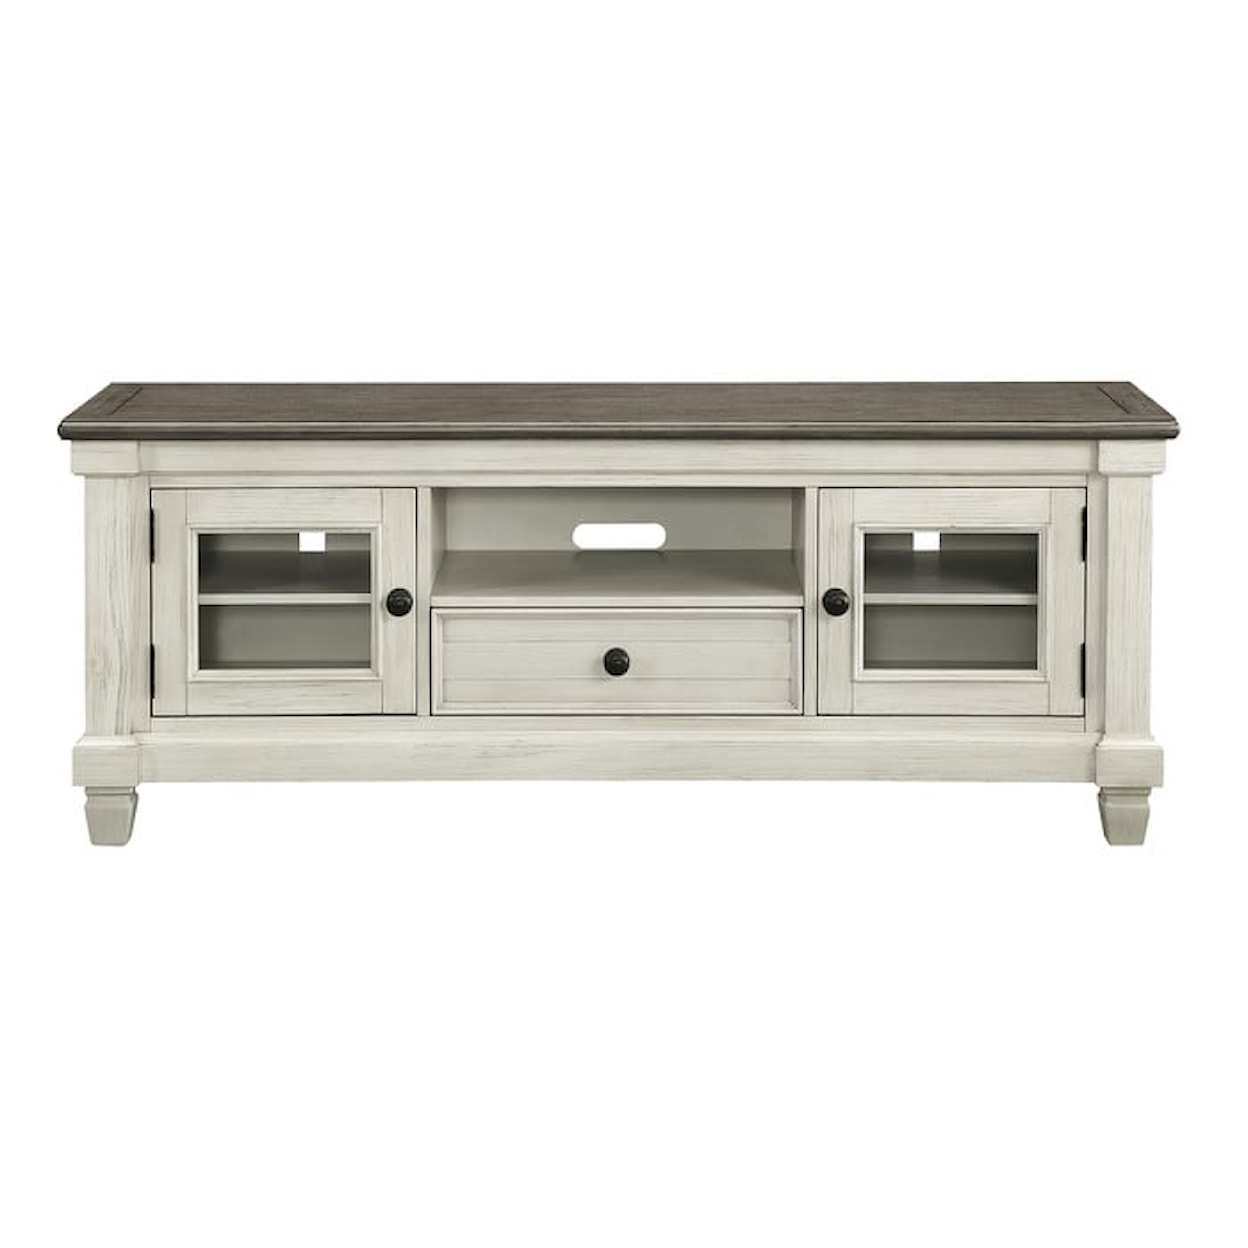 Homelegance Granby TV Stand